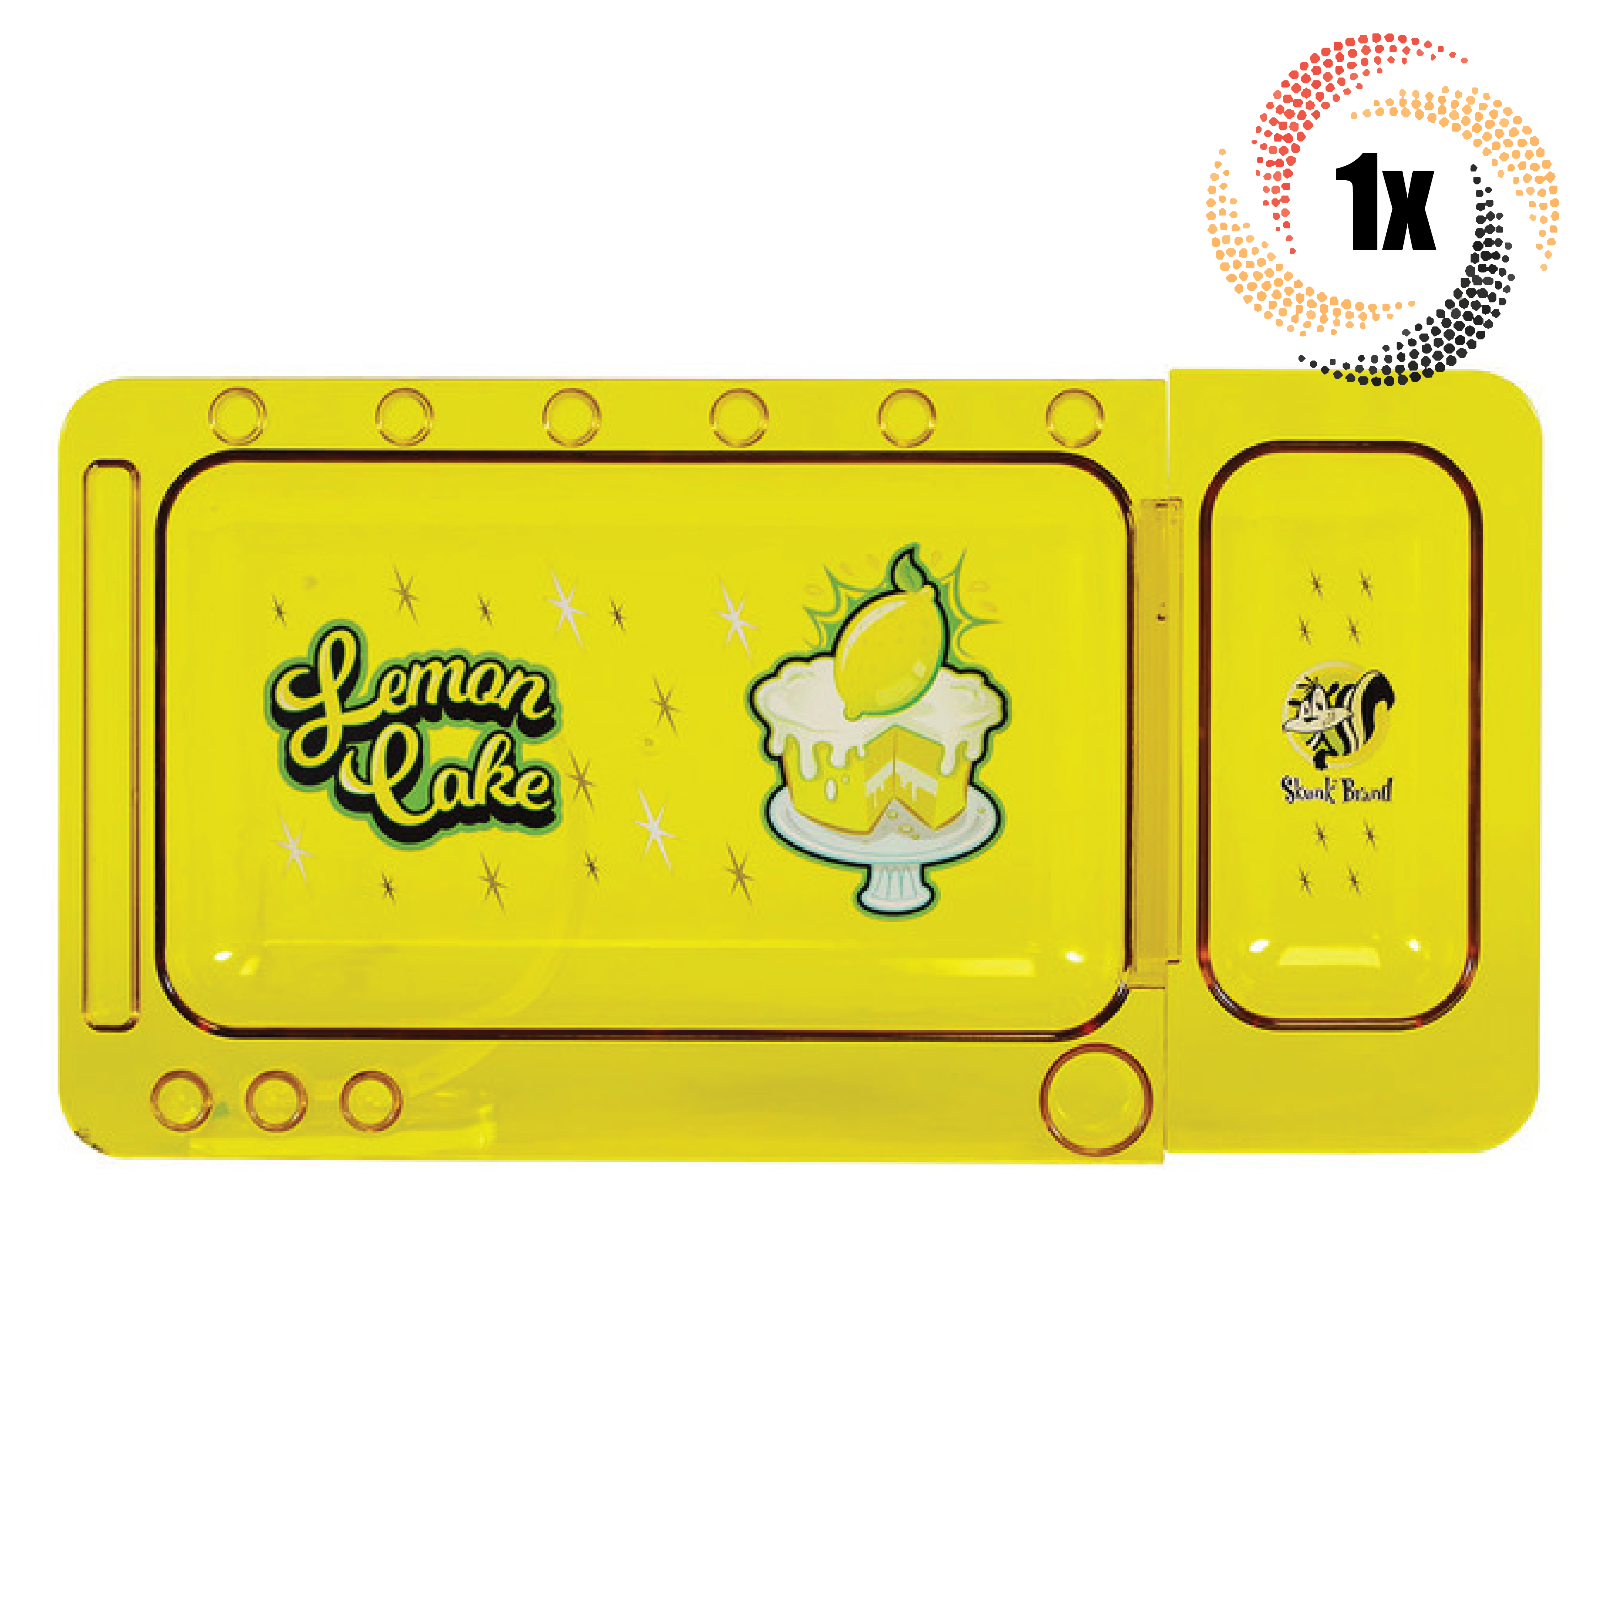 Primary image for 1x Tray Skunk Brand Multifunctional Rolling Tray | Lemon Cake Yellow Design